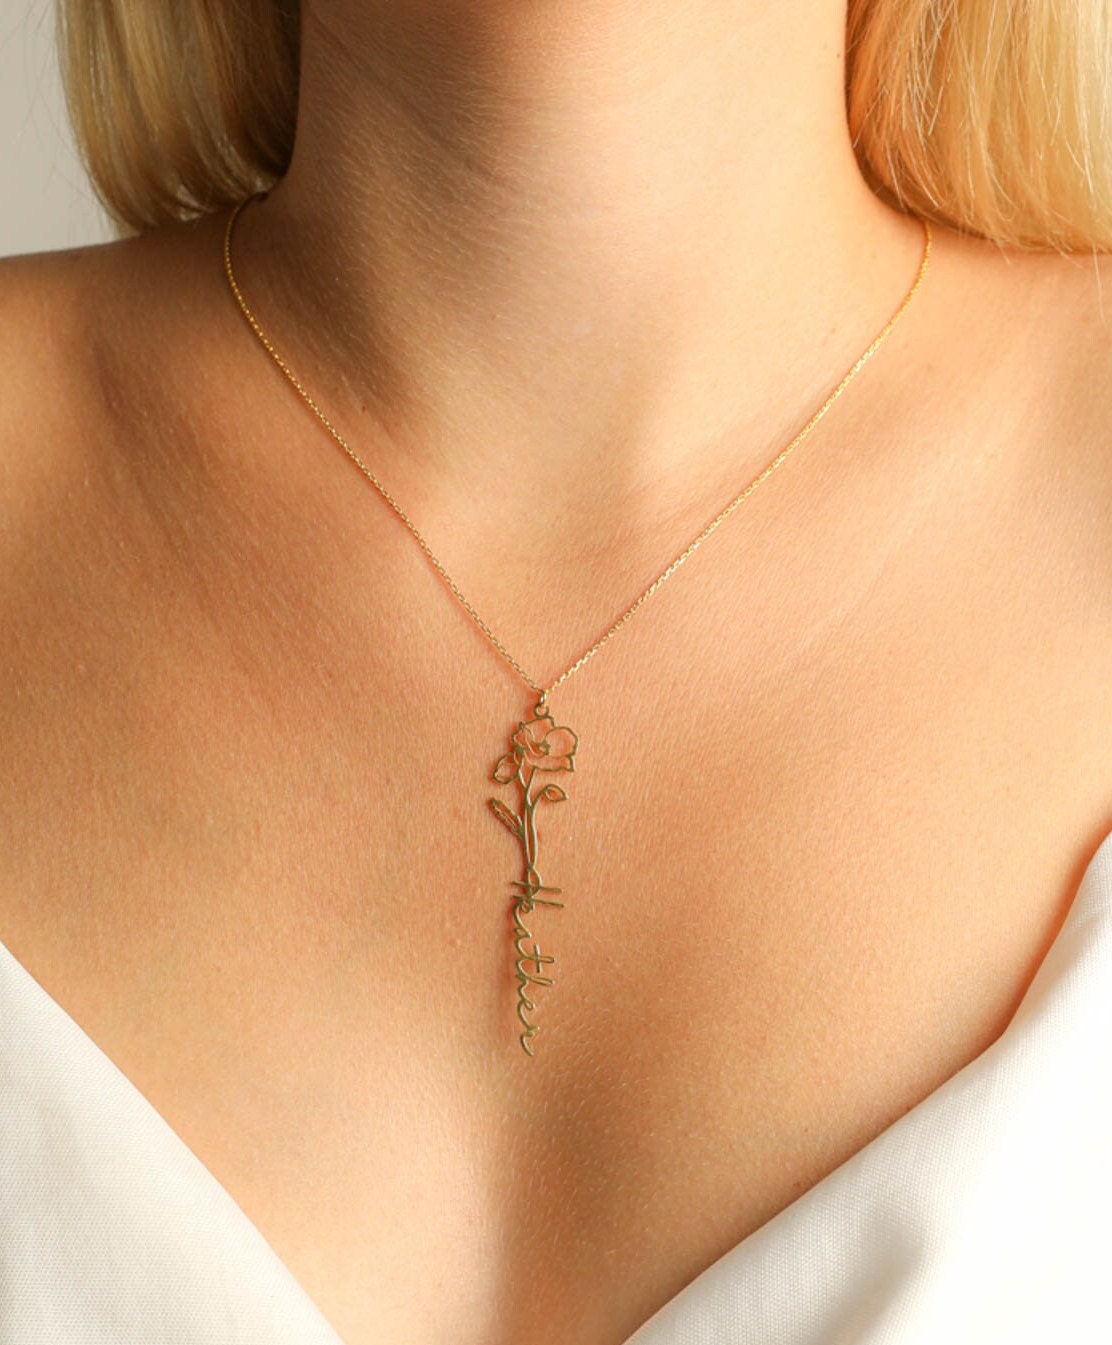 14k Gold Name Necklace With Birth Flower